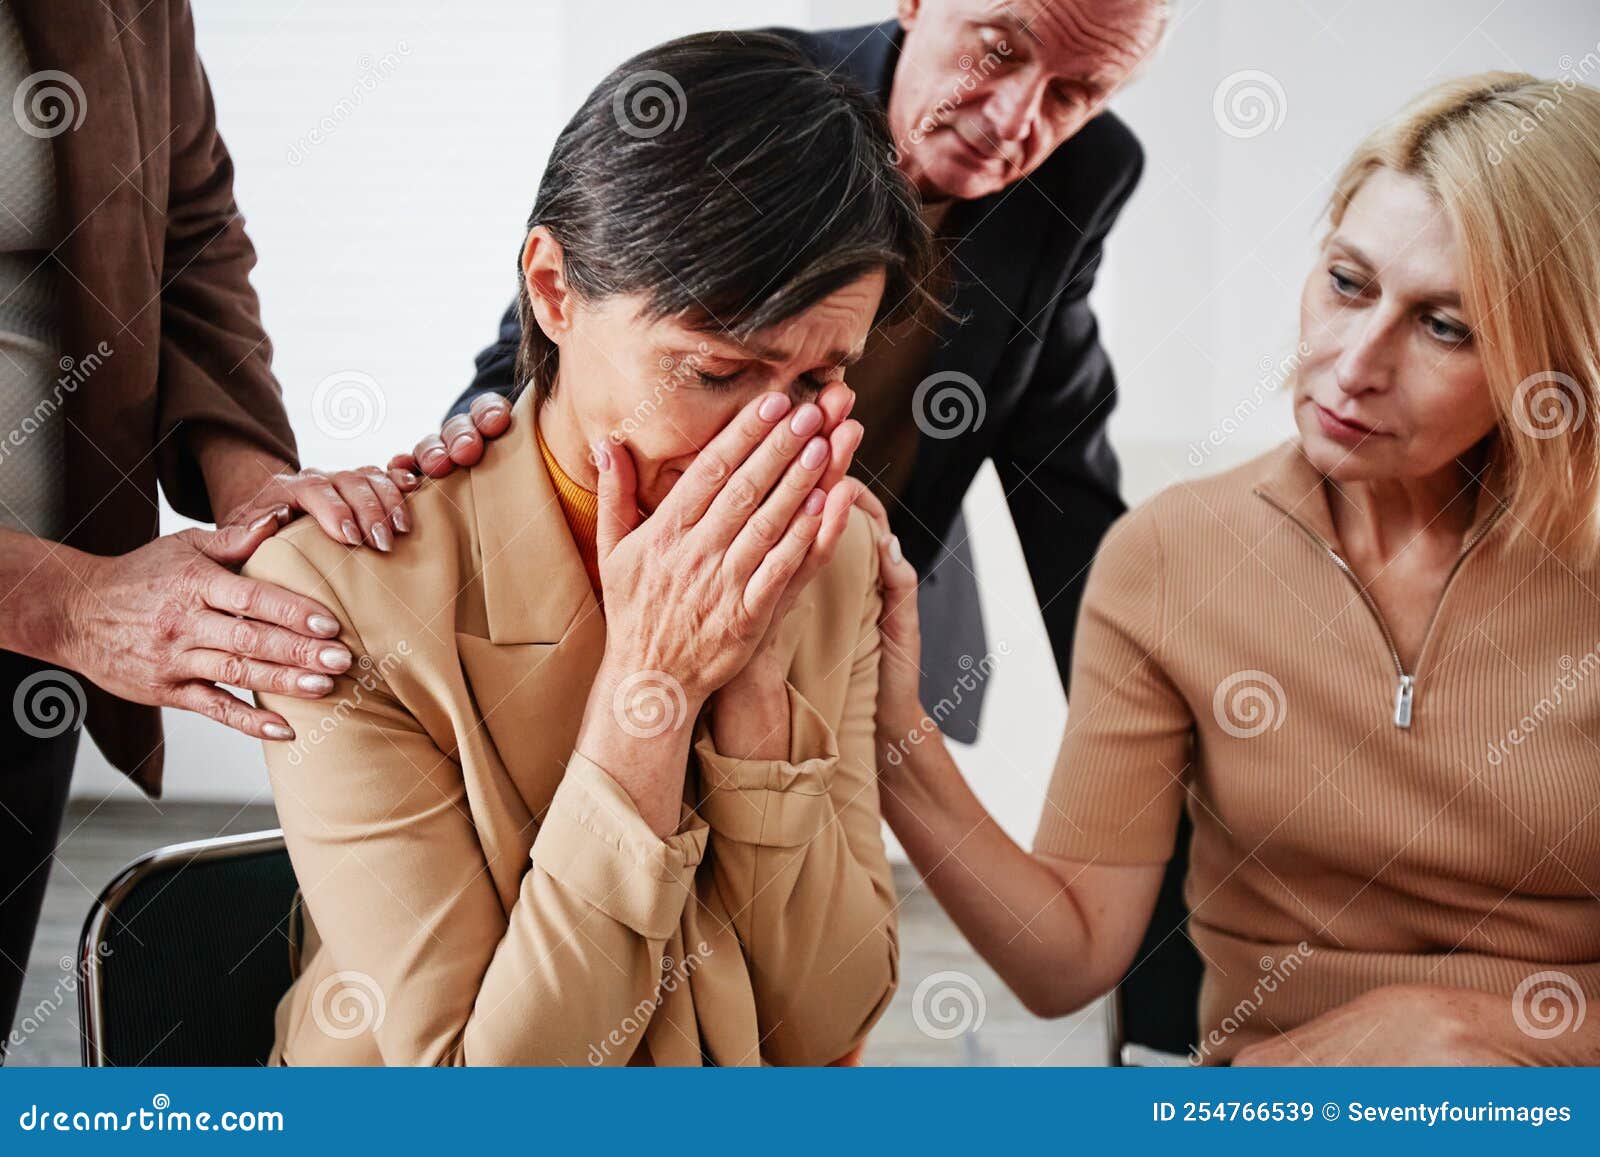 Woman Crying While Talking About Her Problems Stock Image Image Of